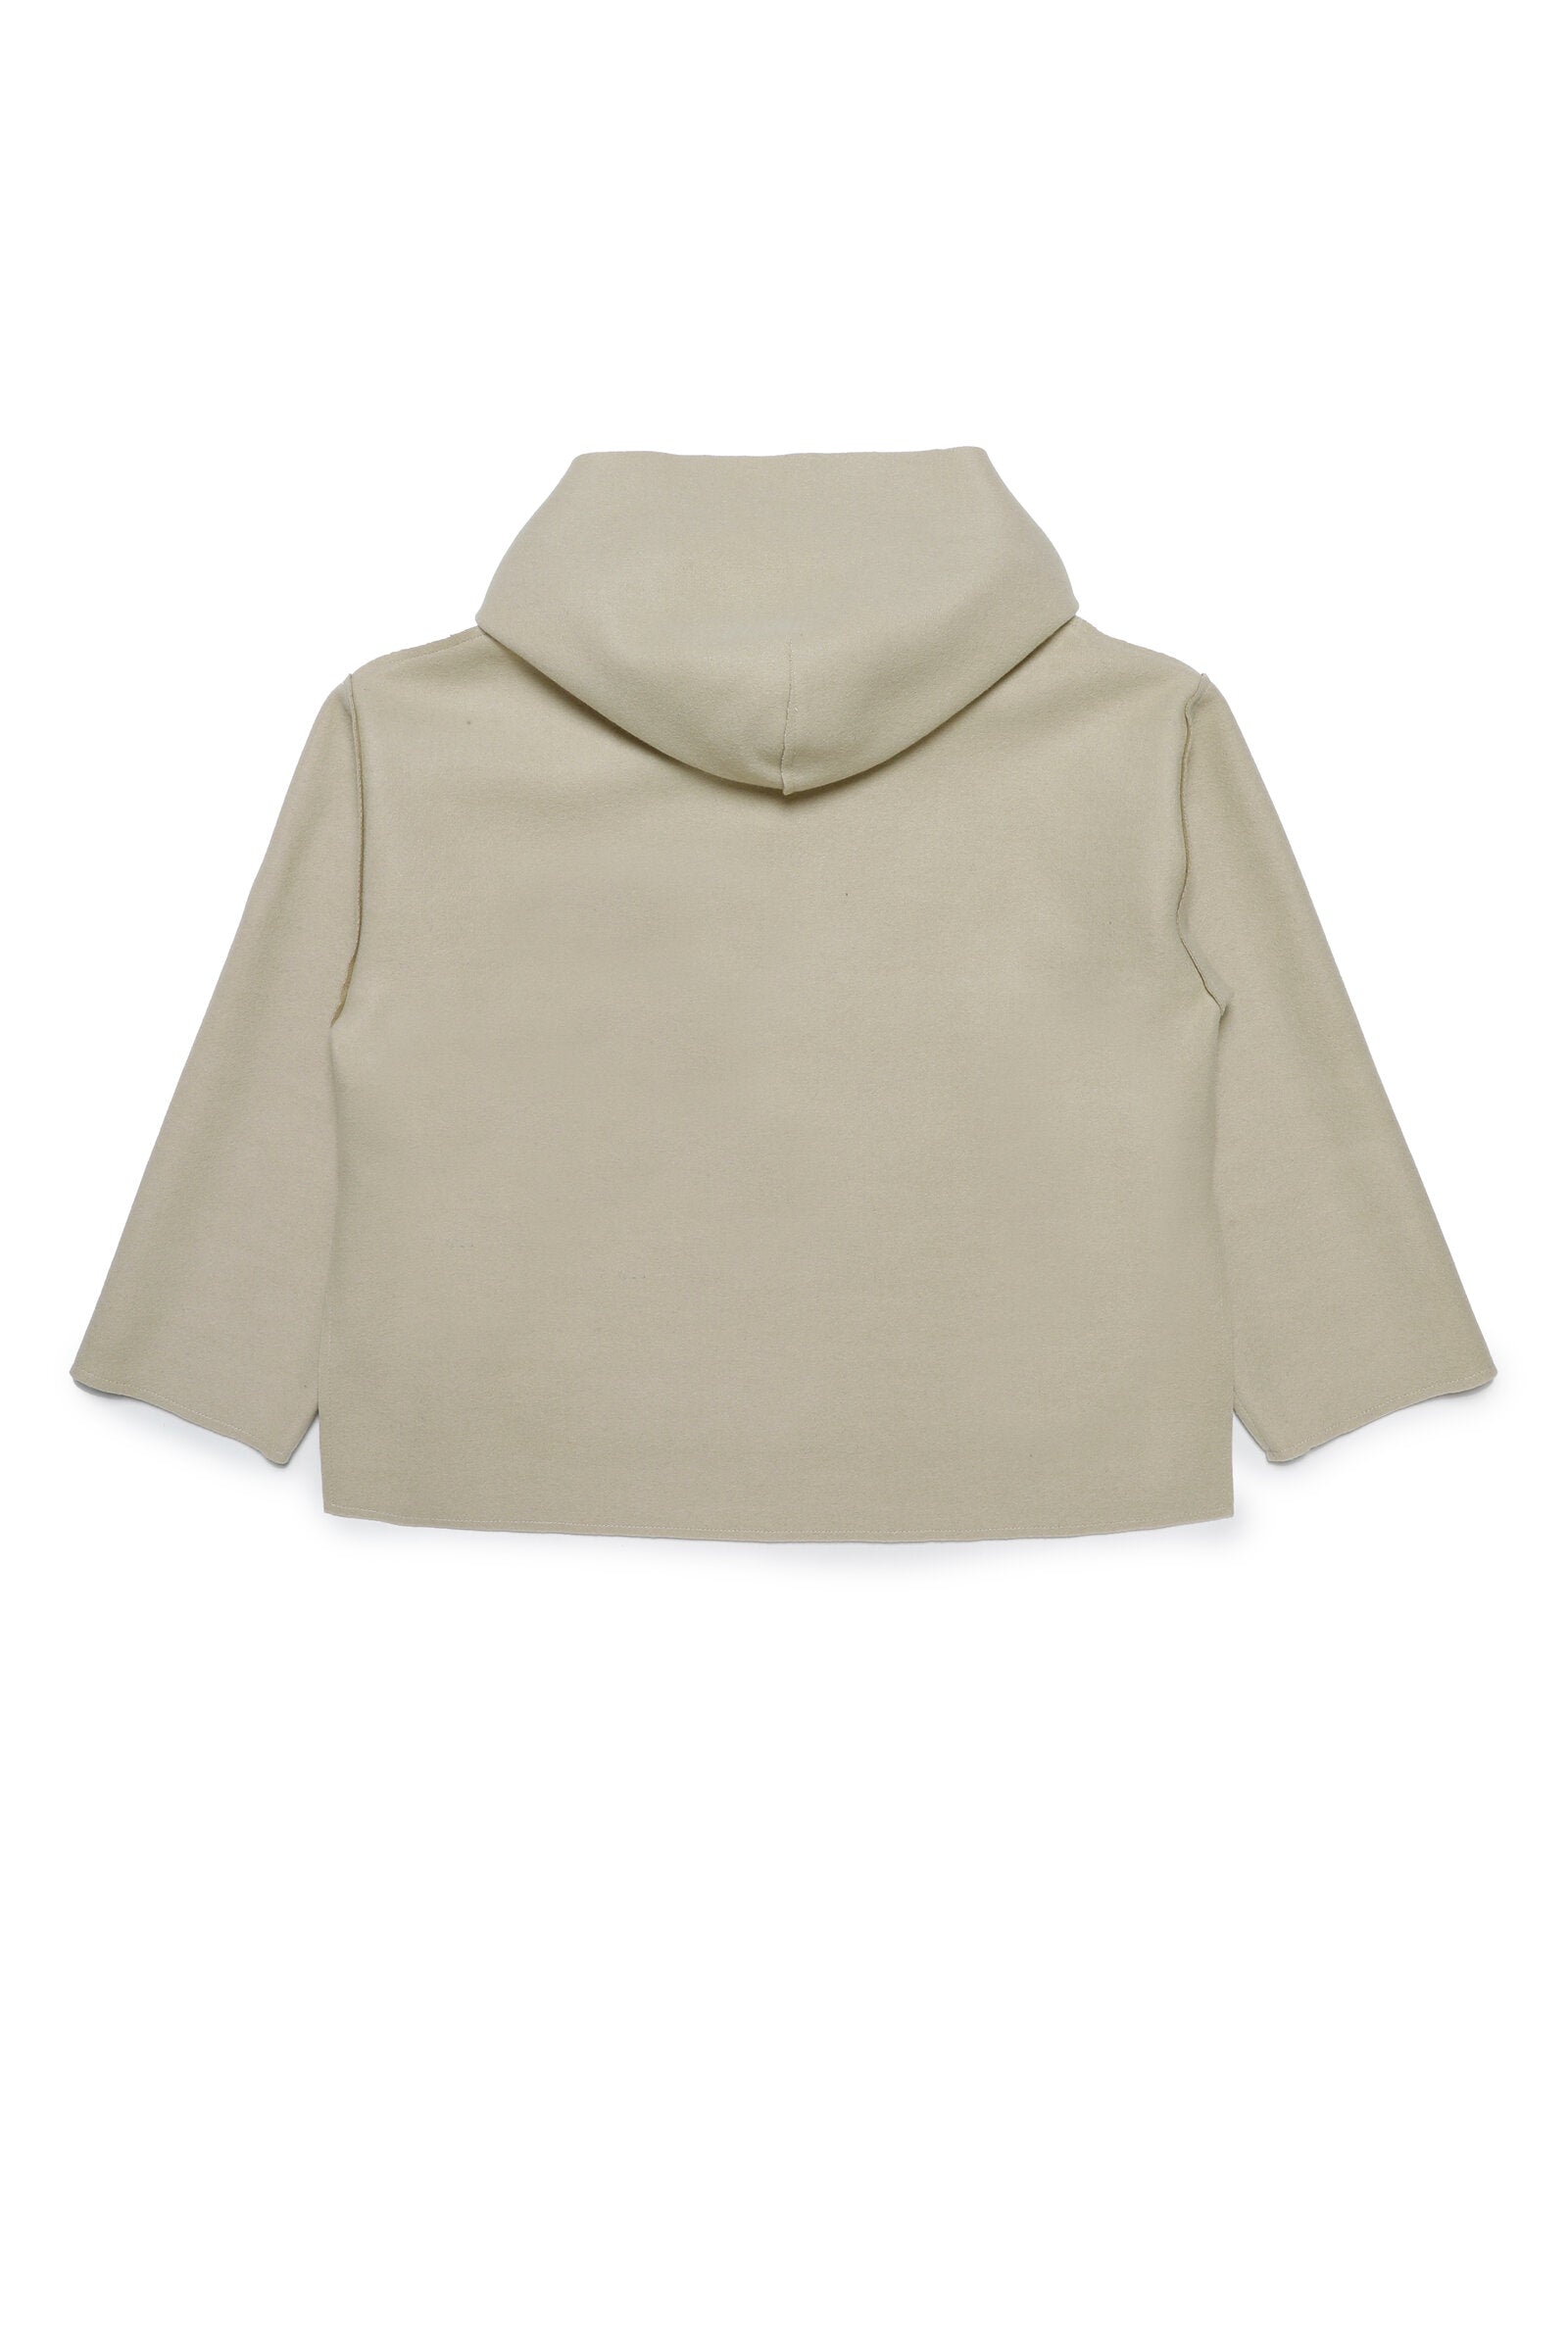 Cropped cloth hooded sweatshirt with side vents at the bottom